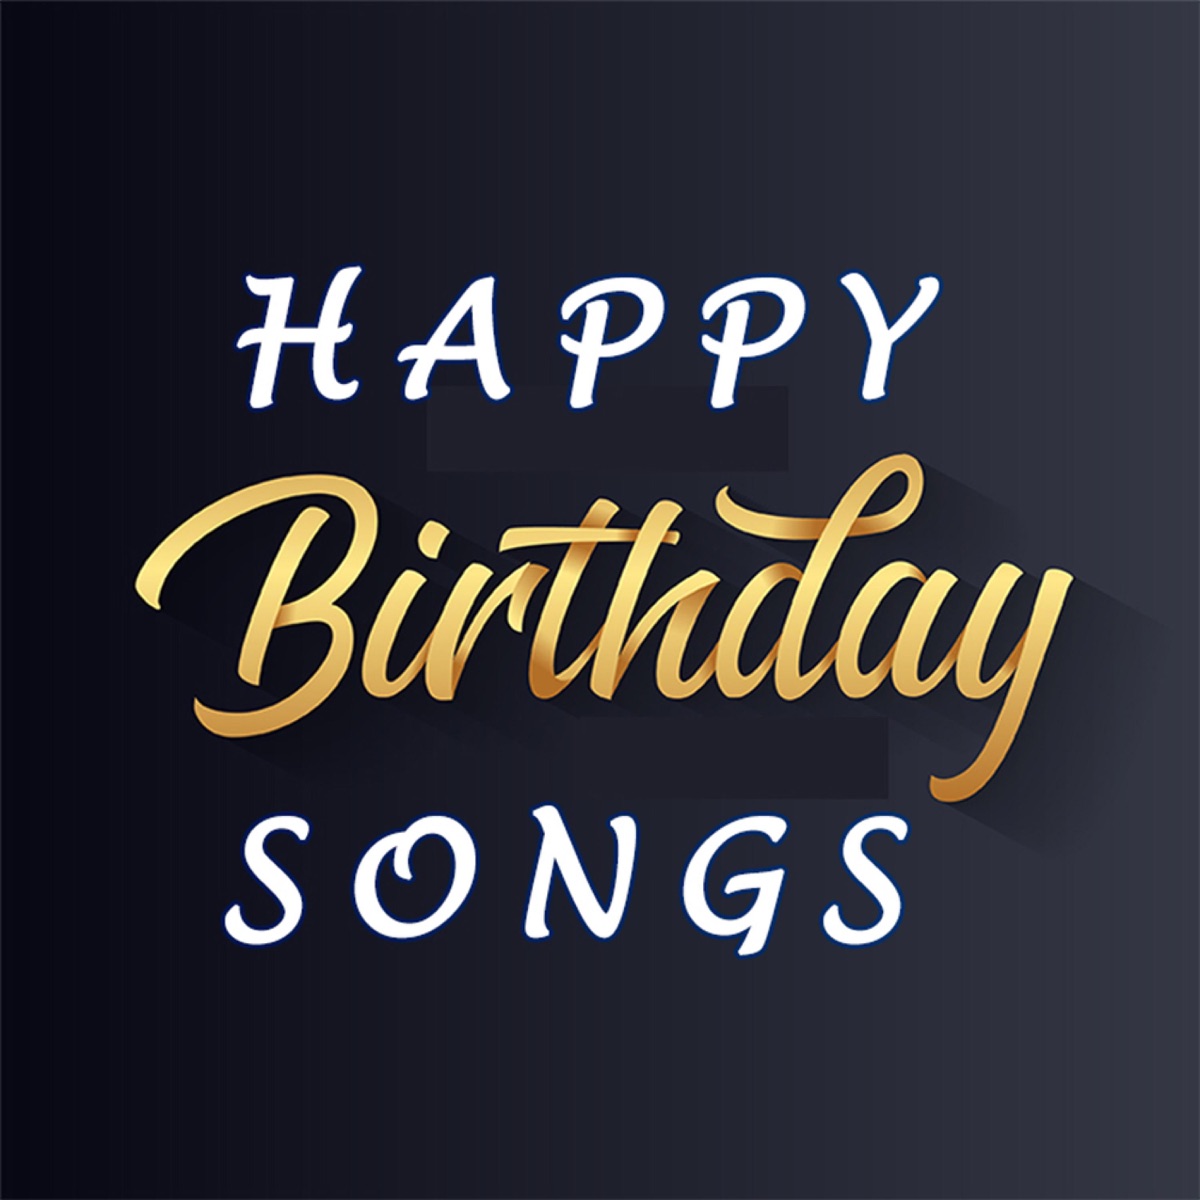 Happy Birthday Song Indian Names 4 by Happy Birthday Songs on ...